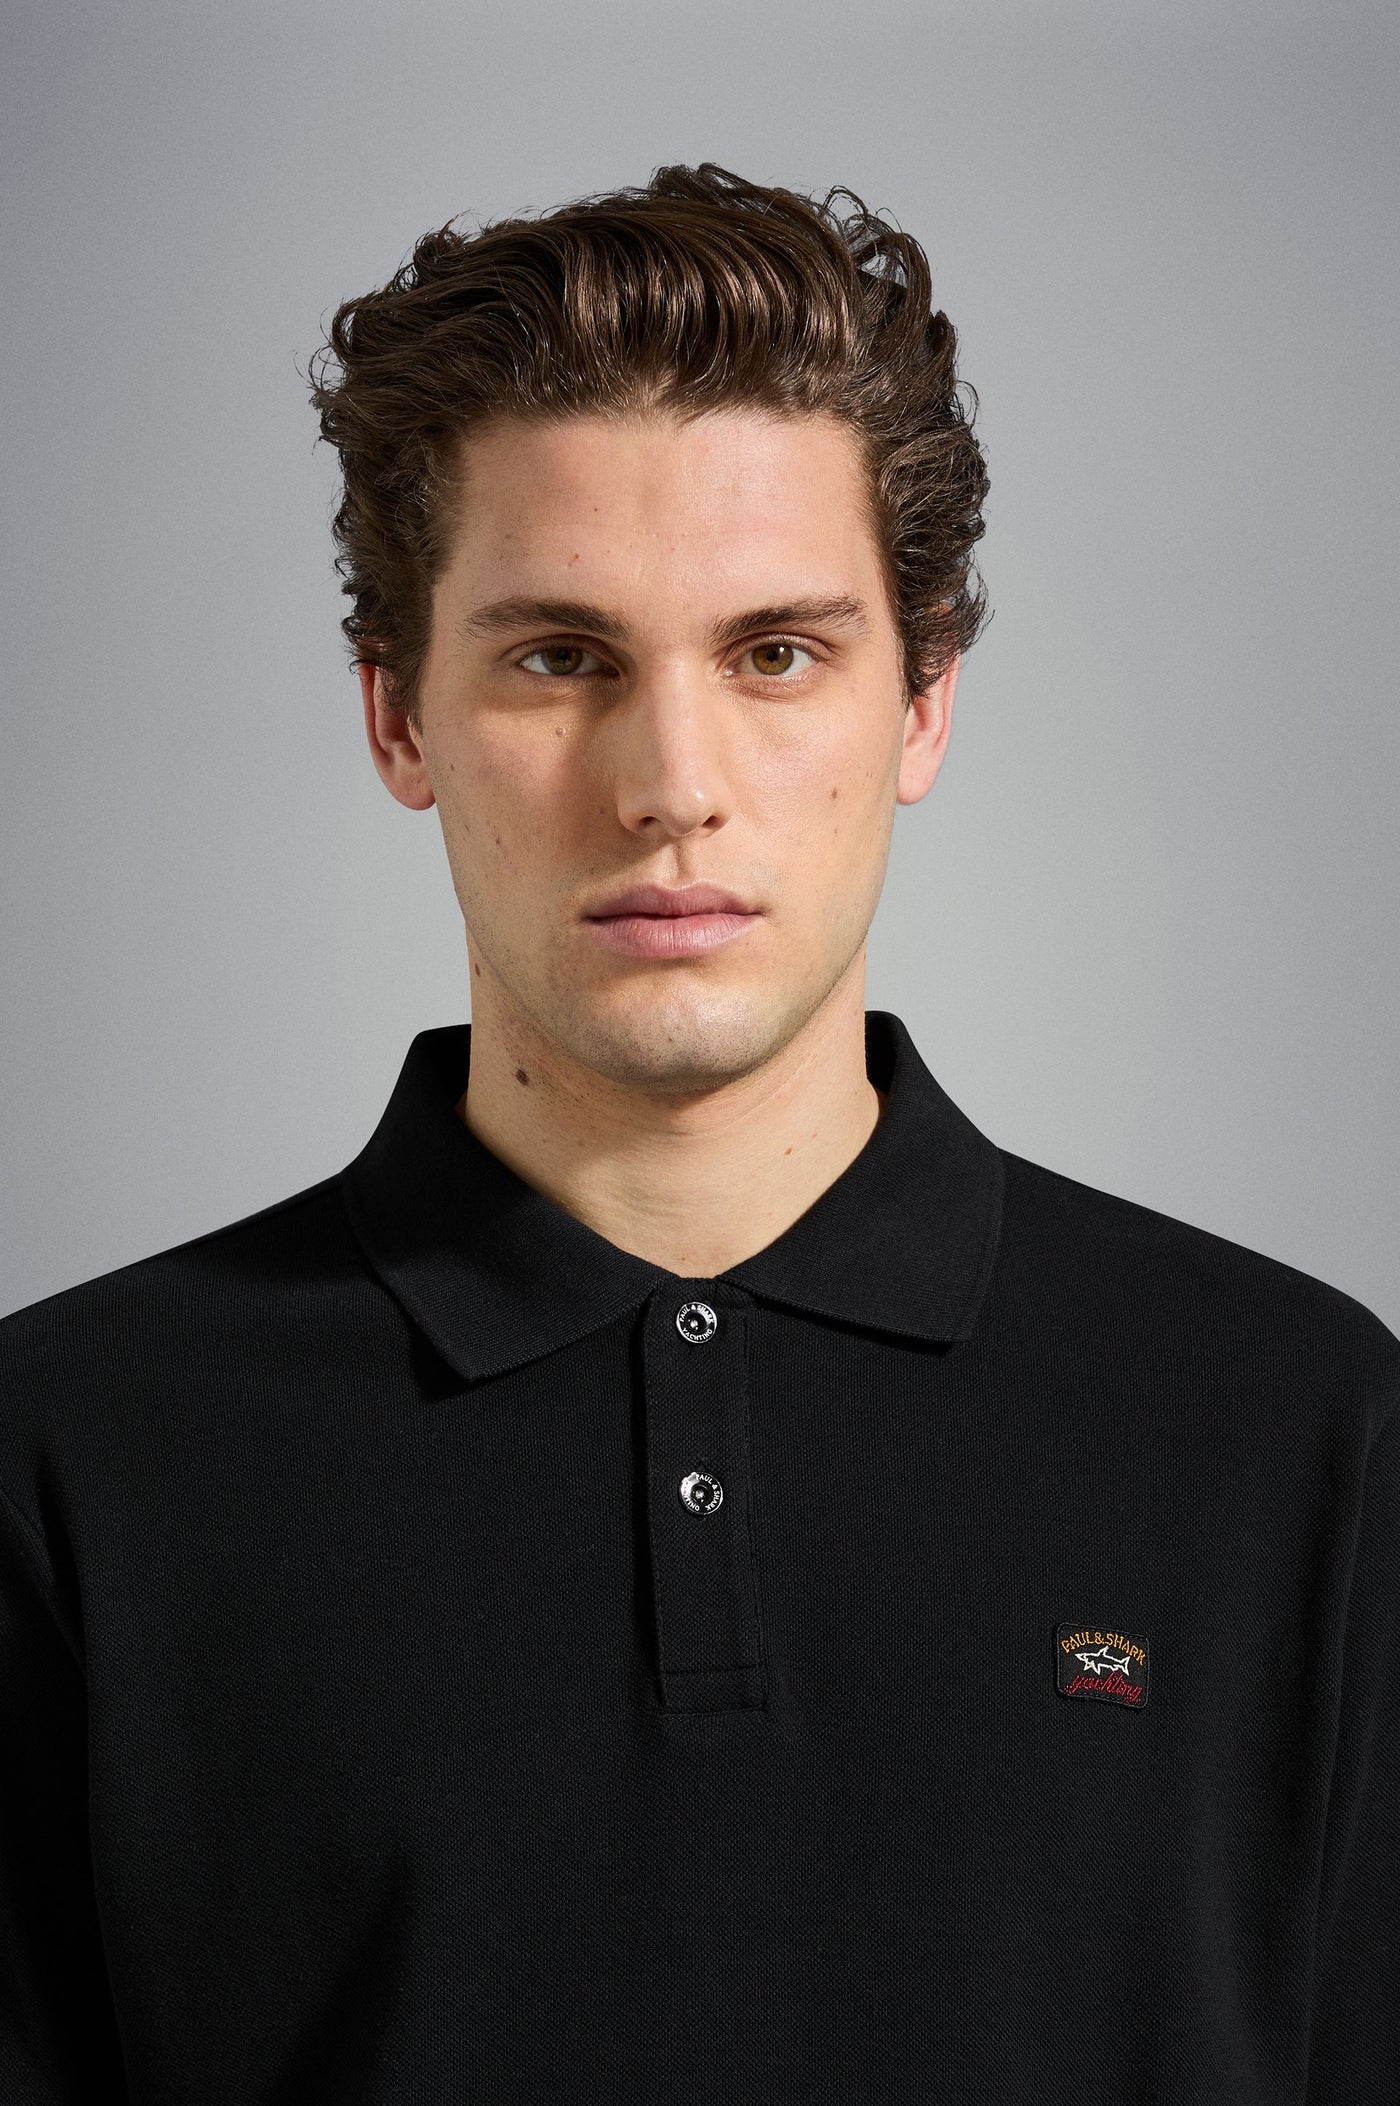 Paul & Shark Organic Cotton Pique Polo with Iconic Badge | Black